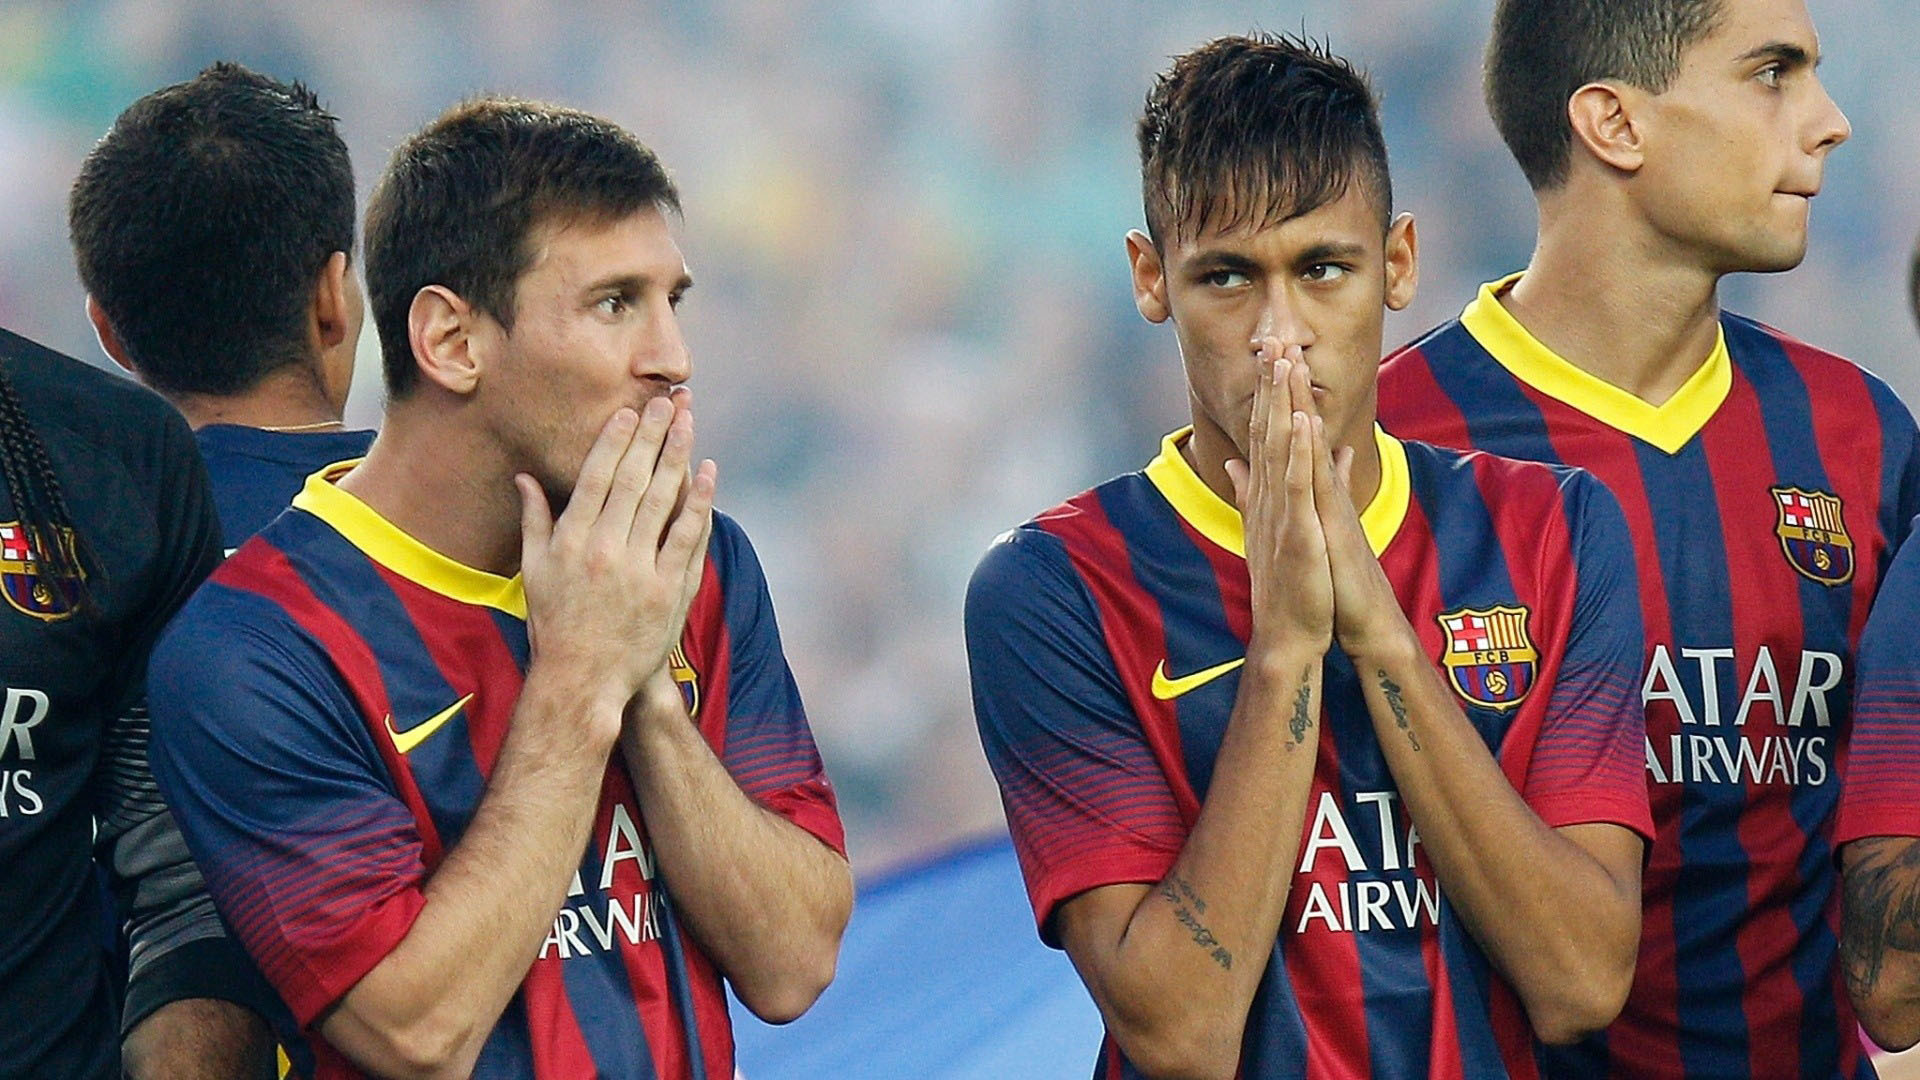 1920x1080 Messi and Neymar nervous during a Barcelona media photoshoot